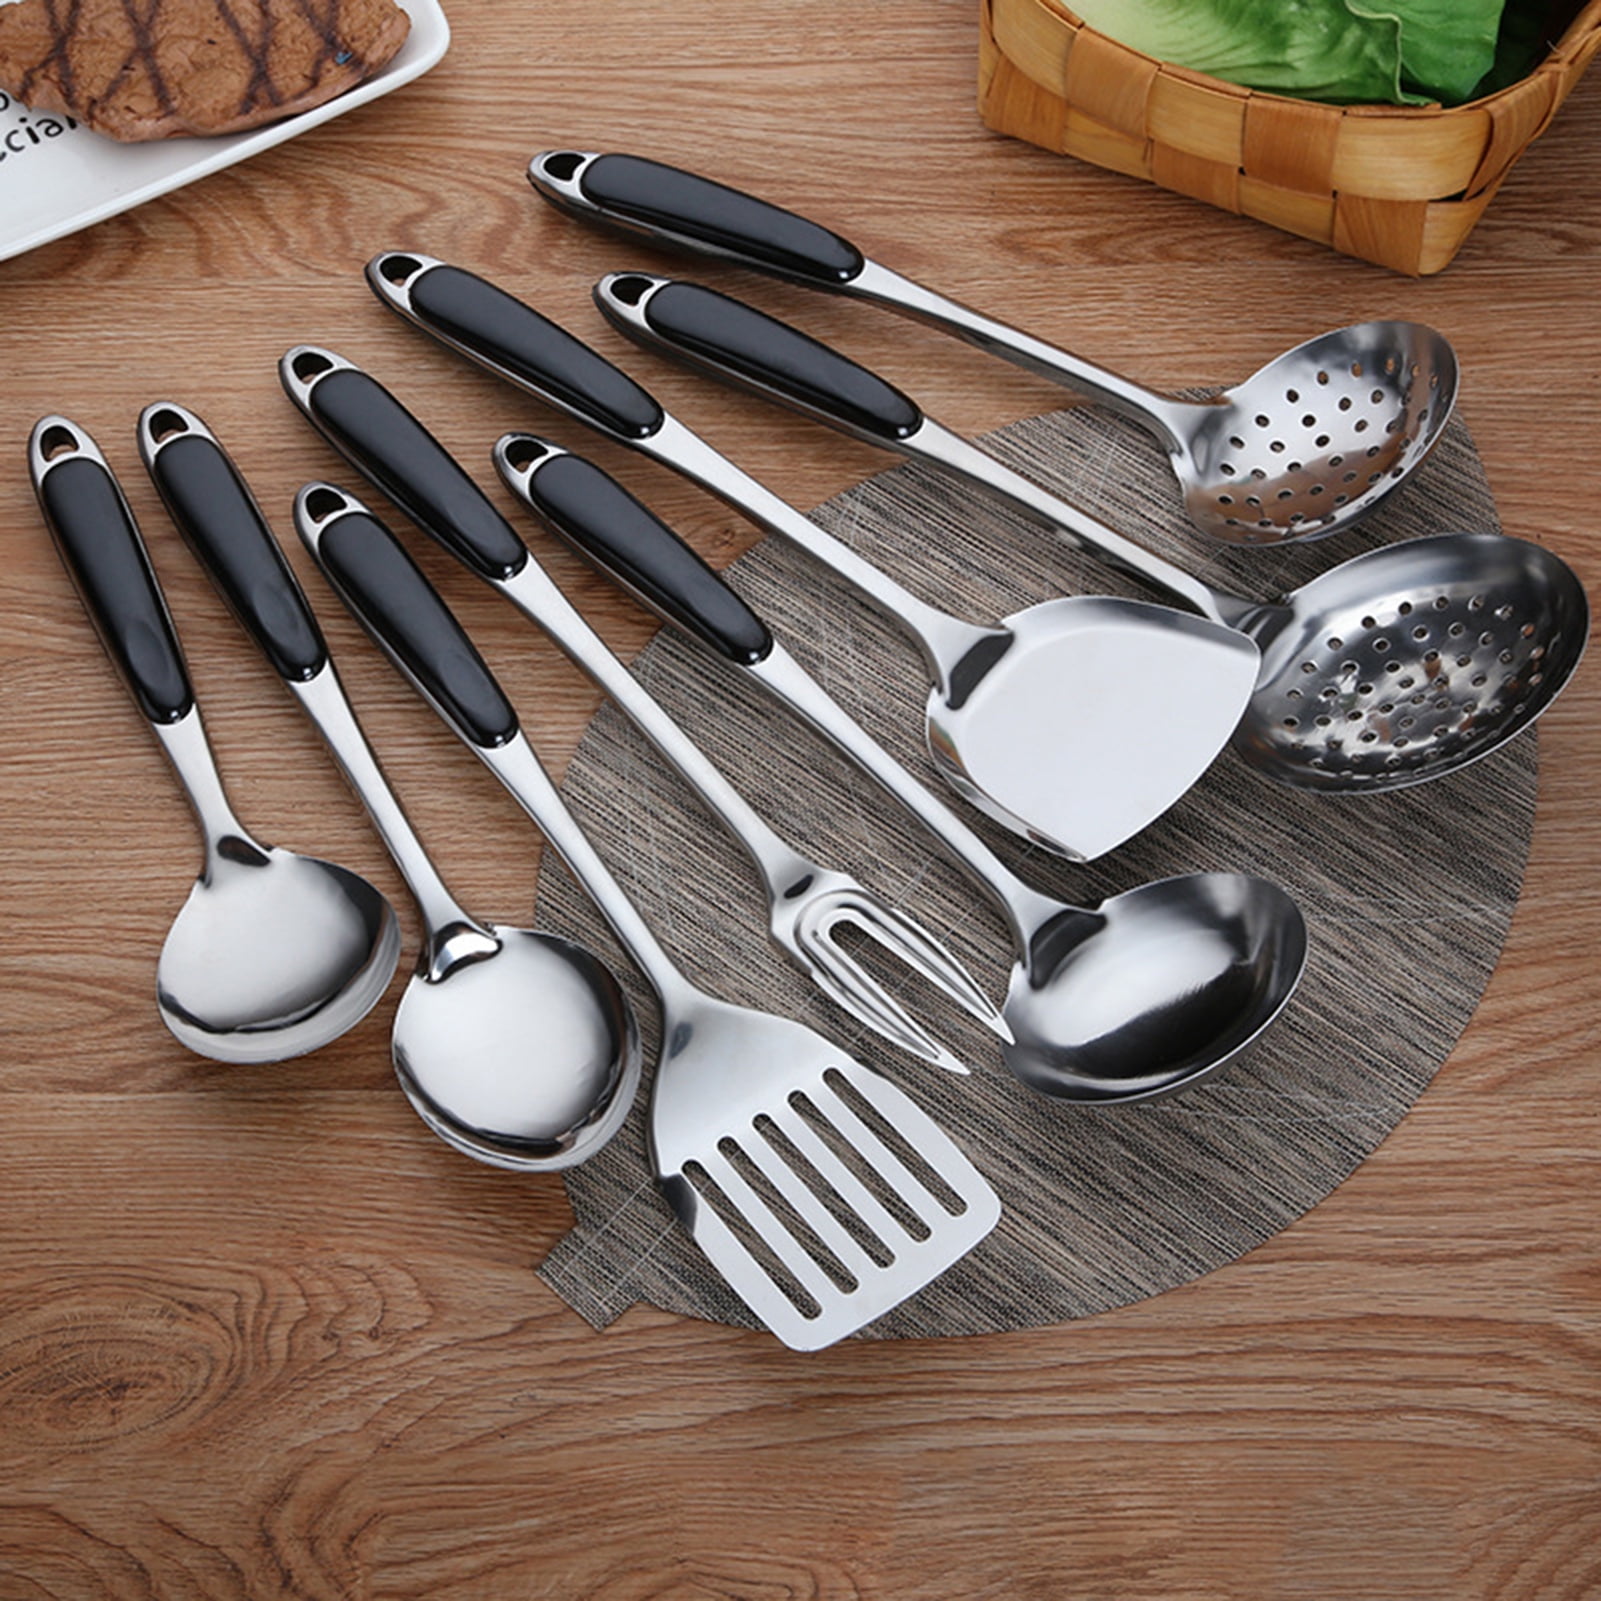 Soup Ladle Hangable Kitchenware mDesign Set of 6 Stainless Steel and Nylon Kitchen Accessories Serving Spoon Kitchen Utensil Set with Spatula Slotted Spoon and Spaghetti Scoop Grey/Silver